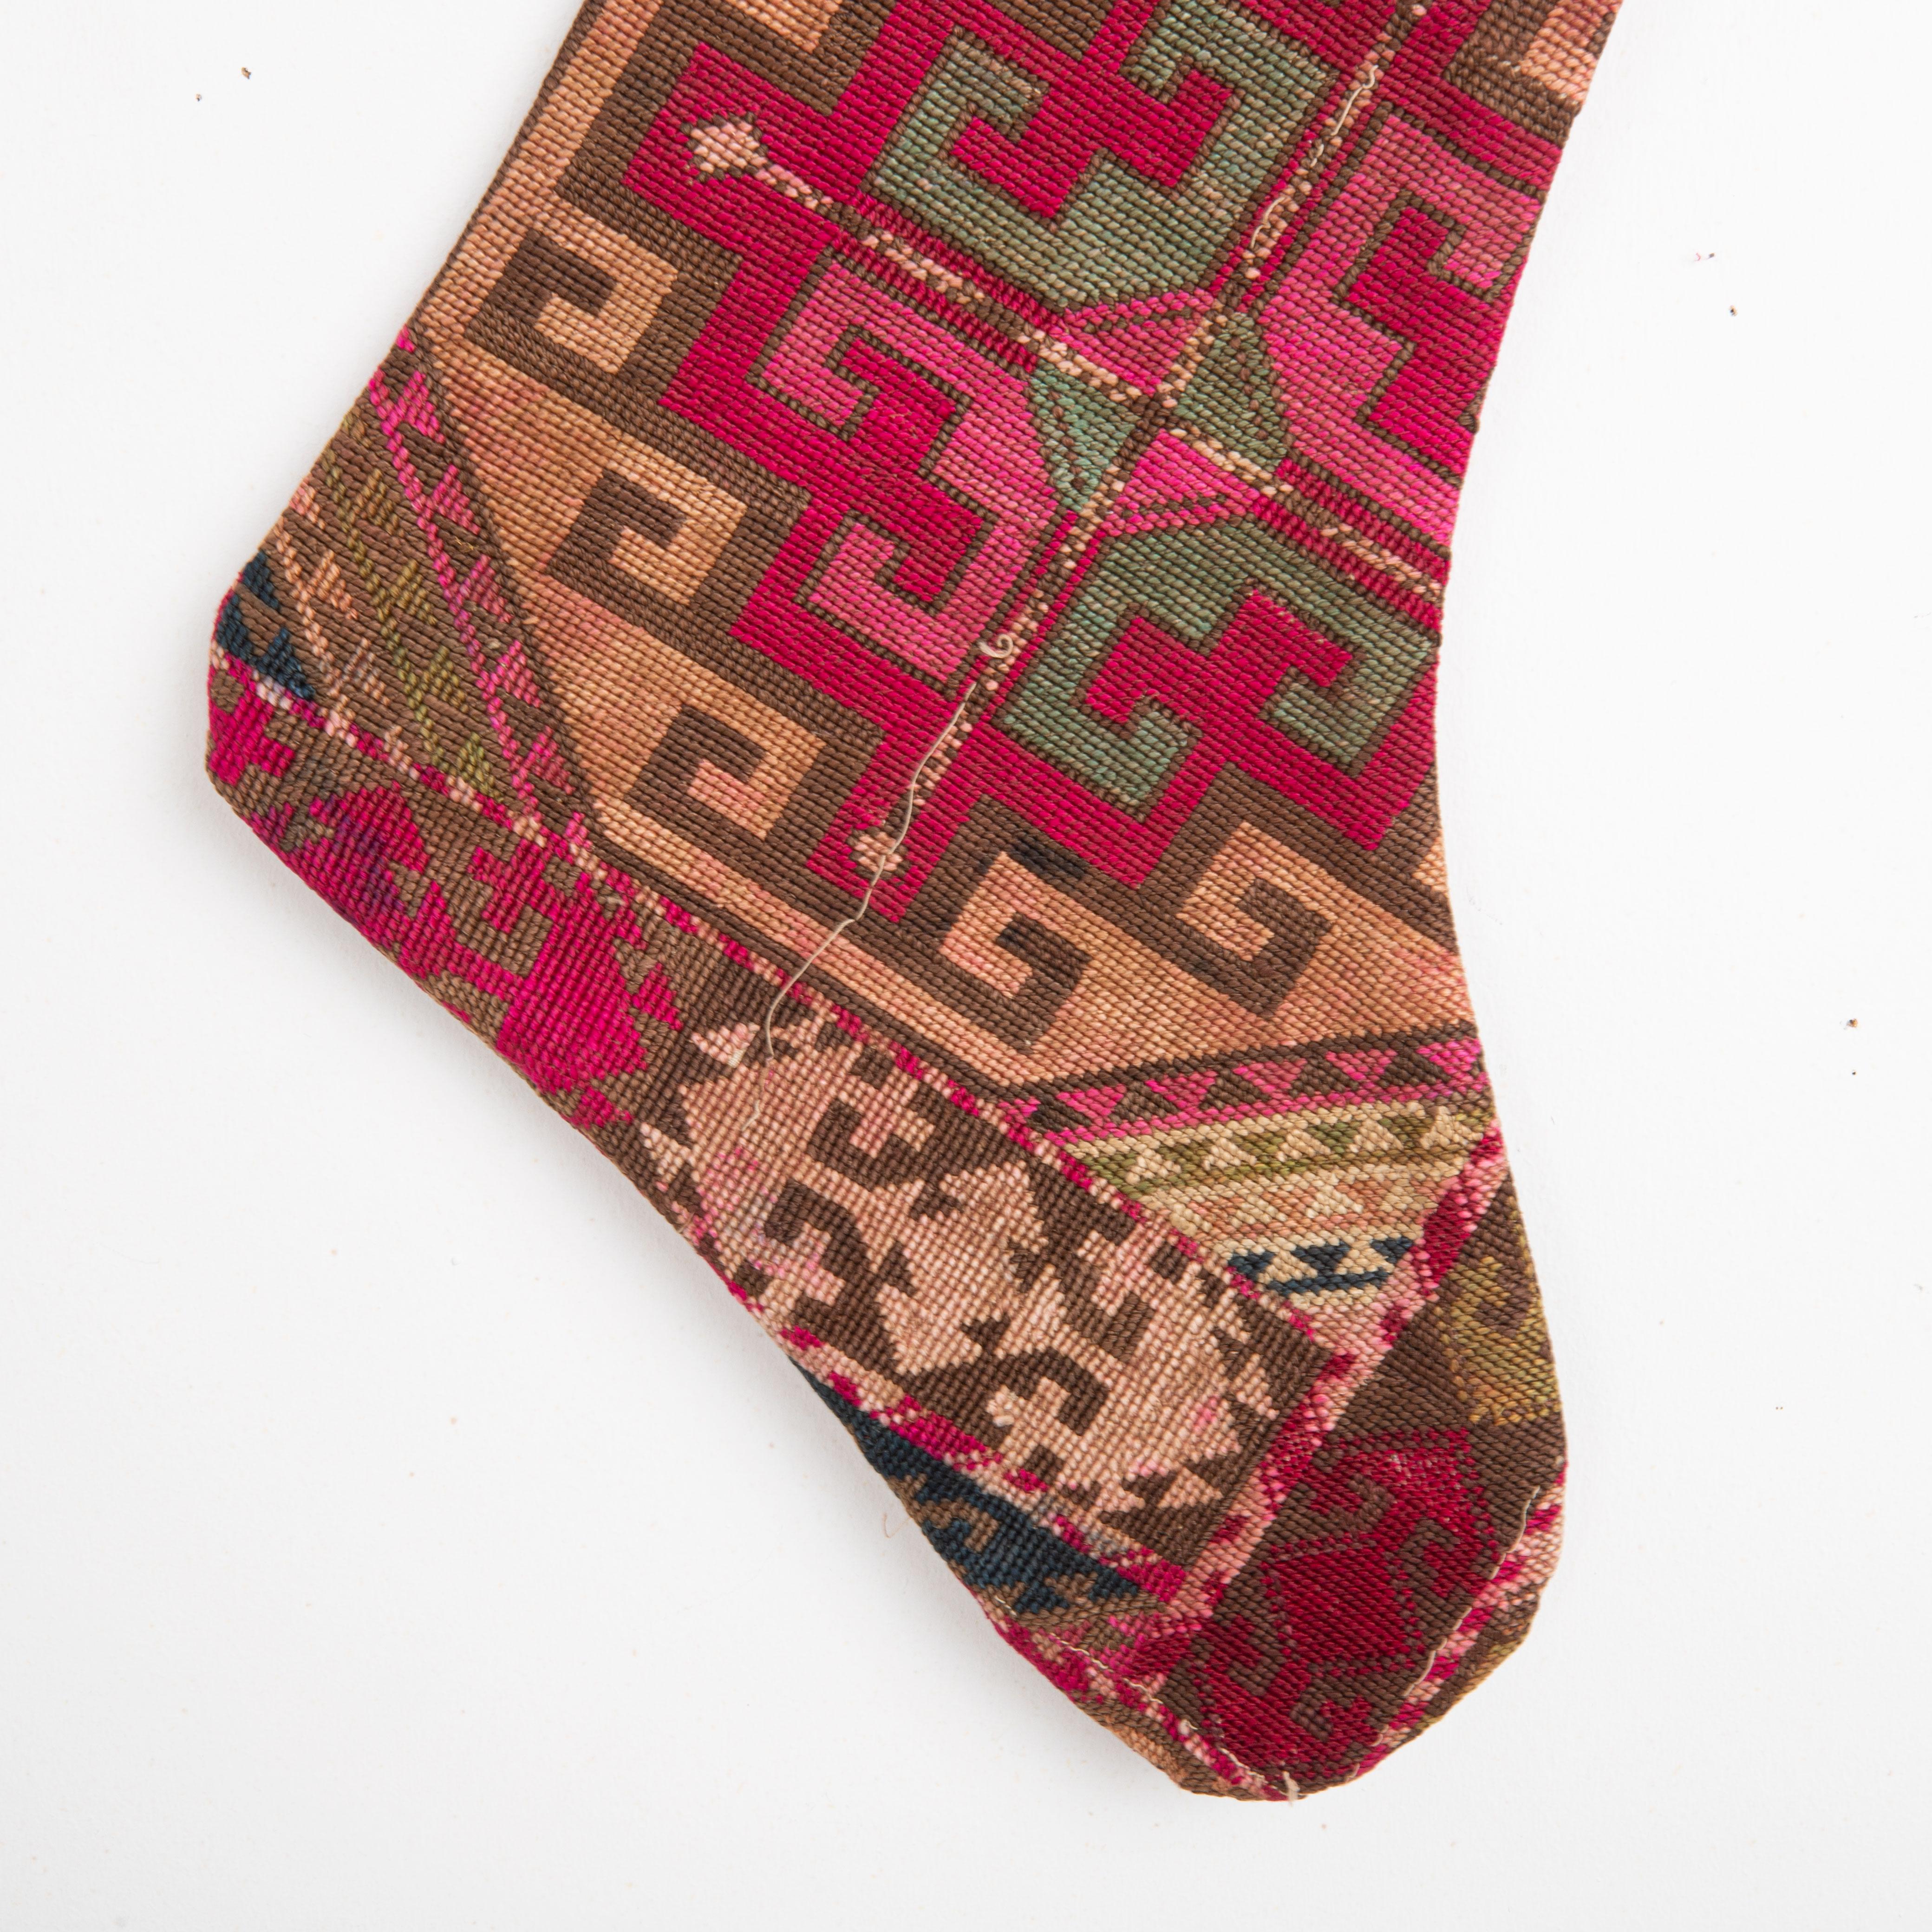 Embroidered Double Sided Christmas Stockings Made from Vintage Uzbek Lakai Embroidery Fragme For Sale